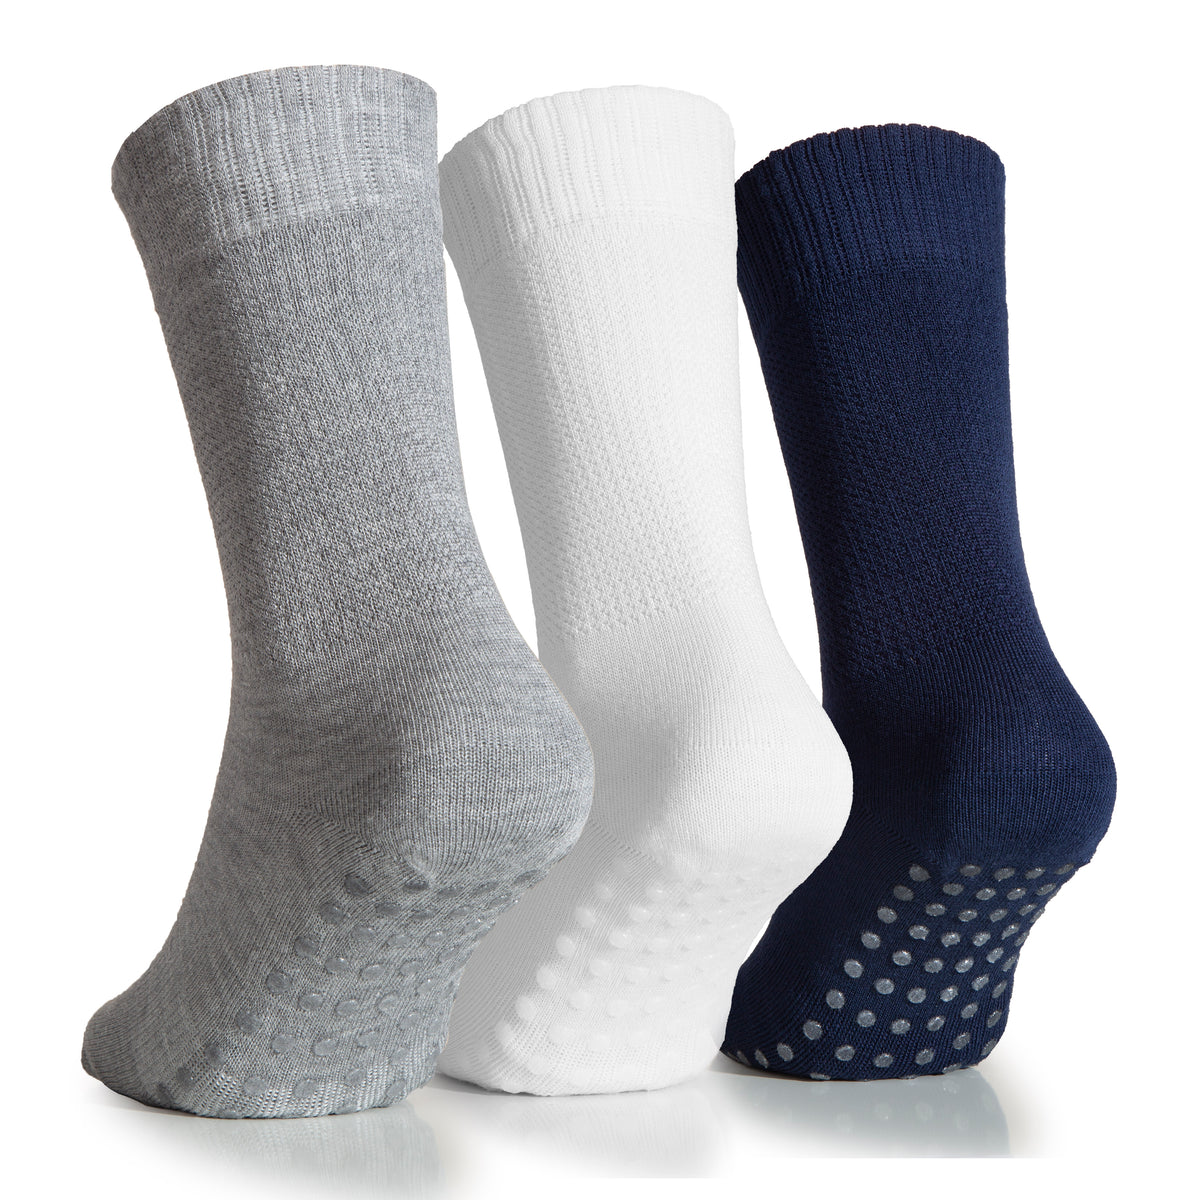 A trio of Women's Bamboo Diabetic Ankle Socks in white, blue, and grey hues, featuring non-slip grip for added safety and comfort.